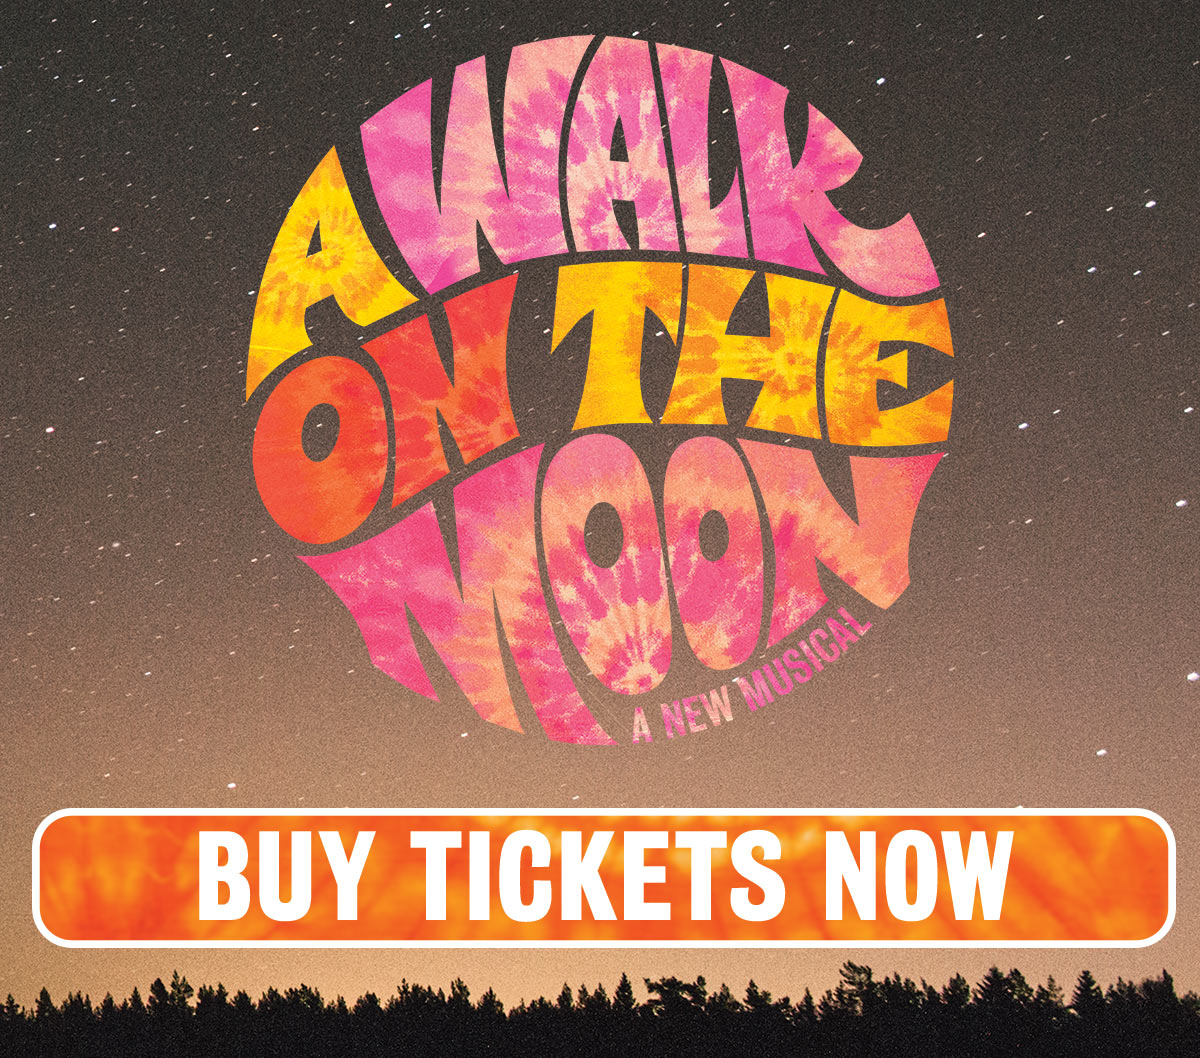 A Walk on the Moon: A New Musical  - Buy Tickets Now